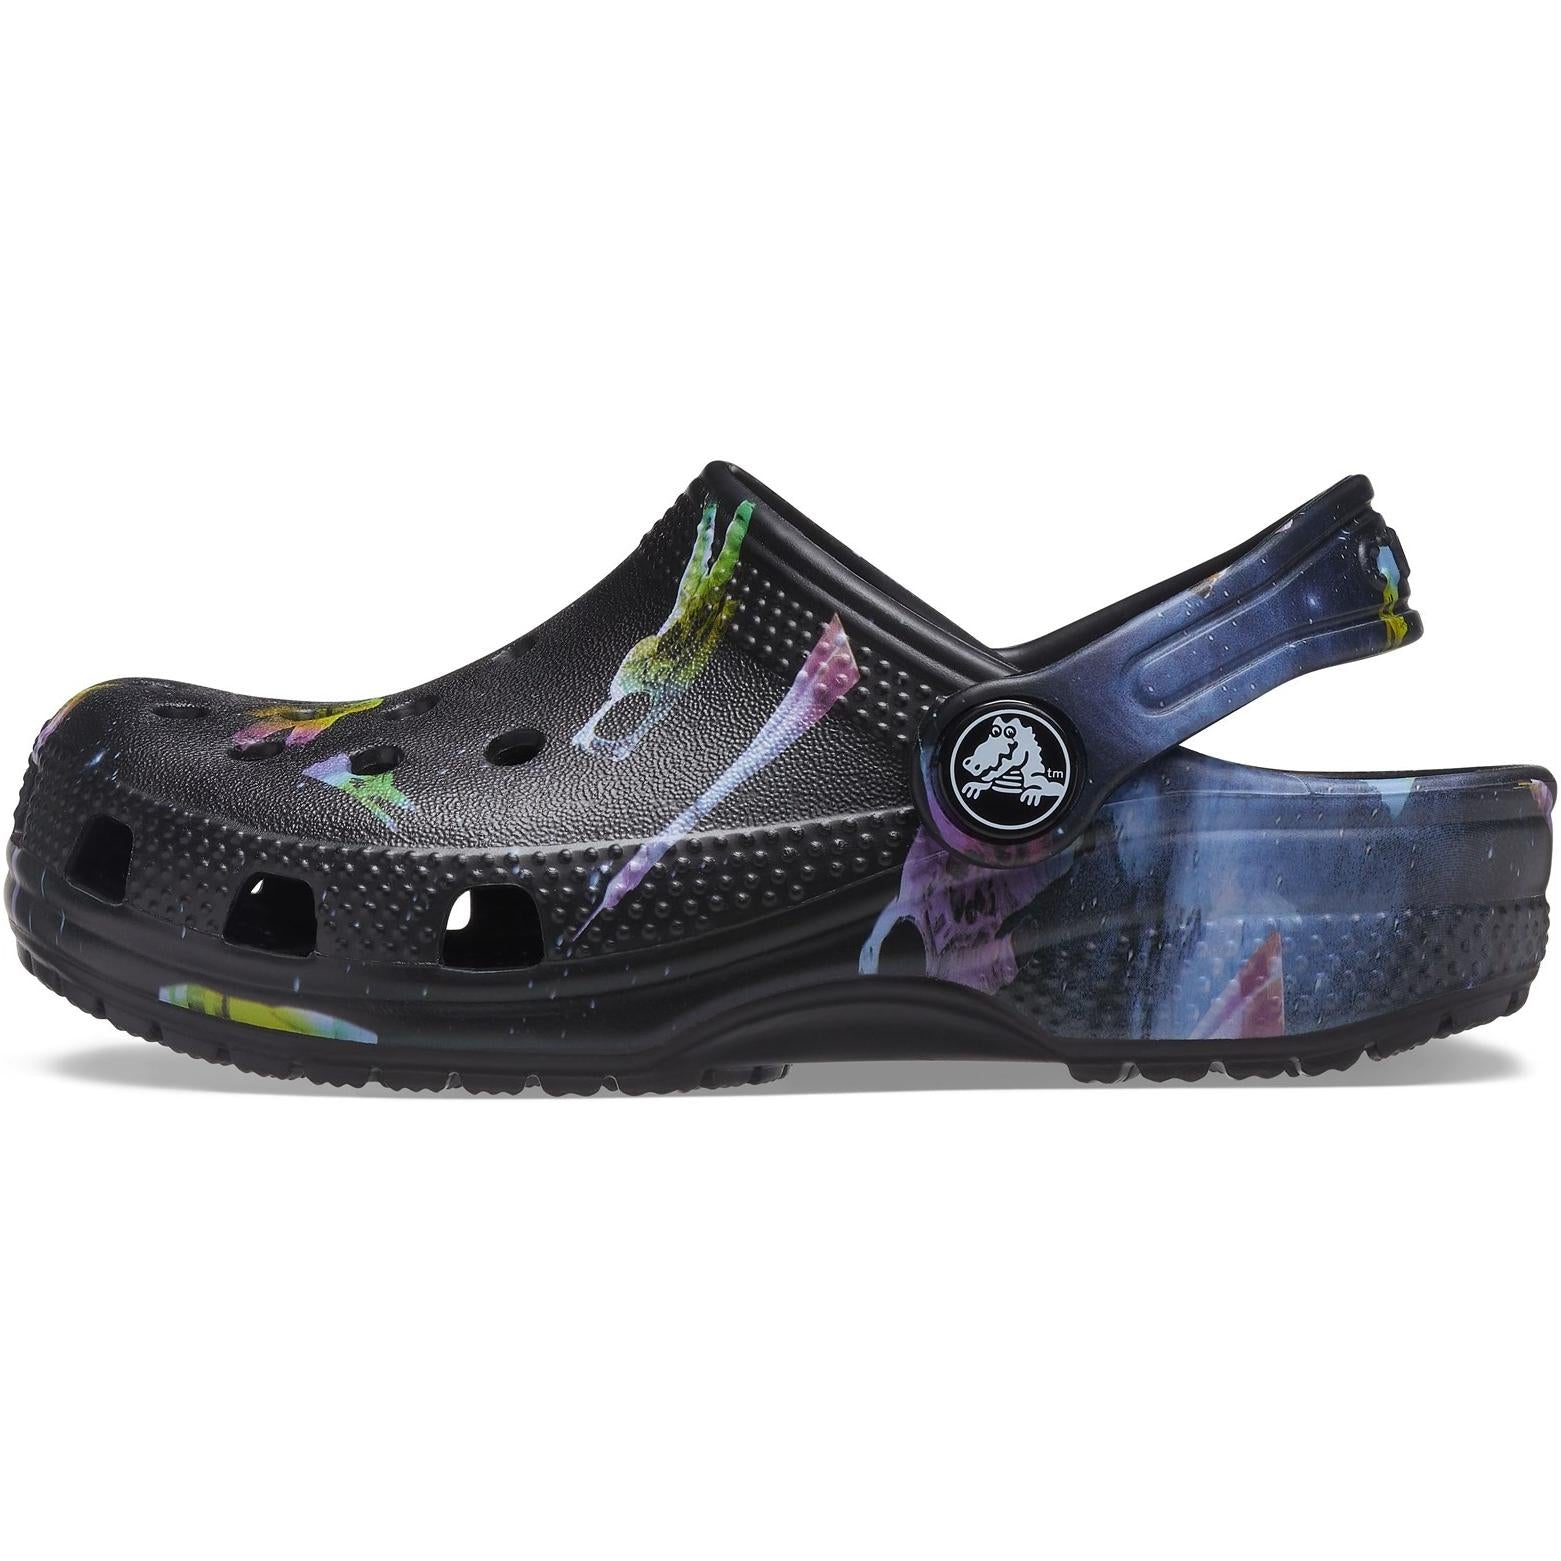 Crocs Classic Out of this World II Clog Shoes